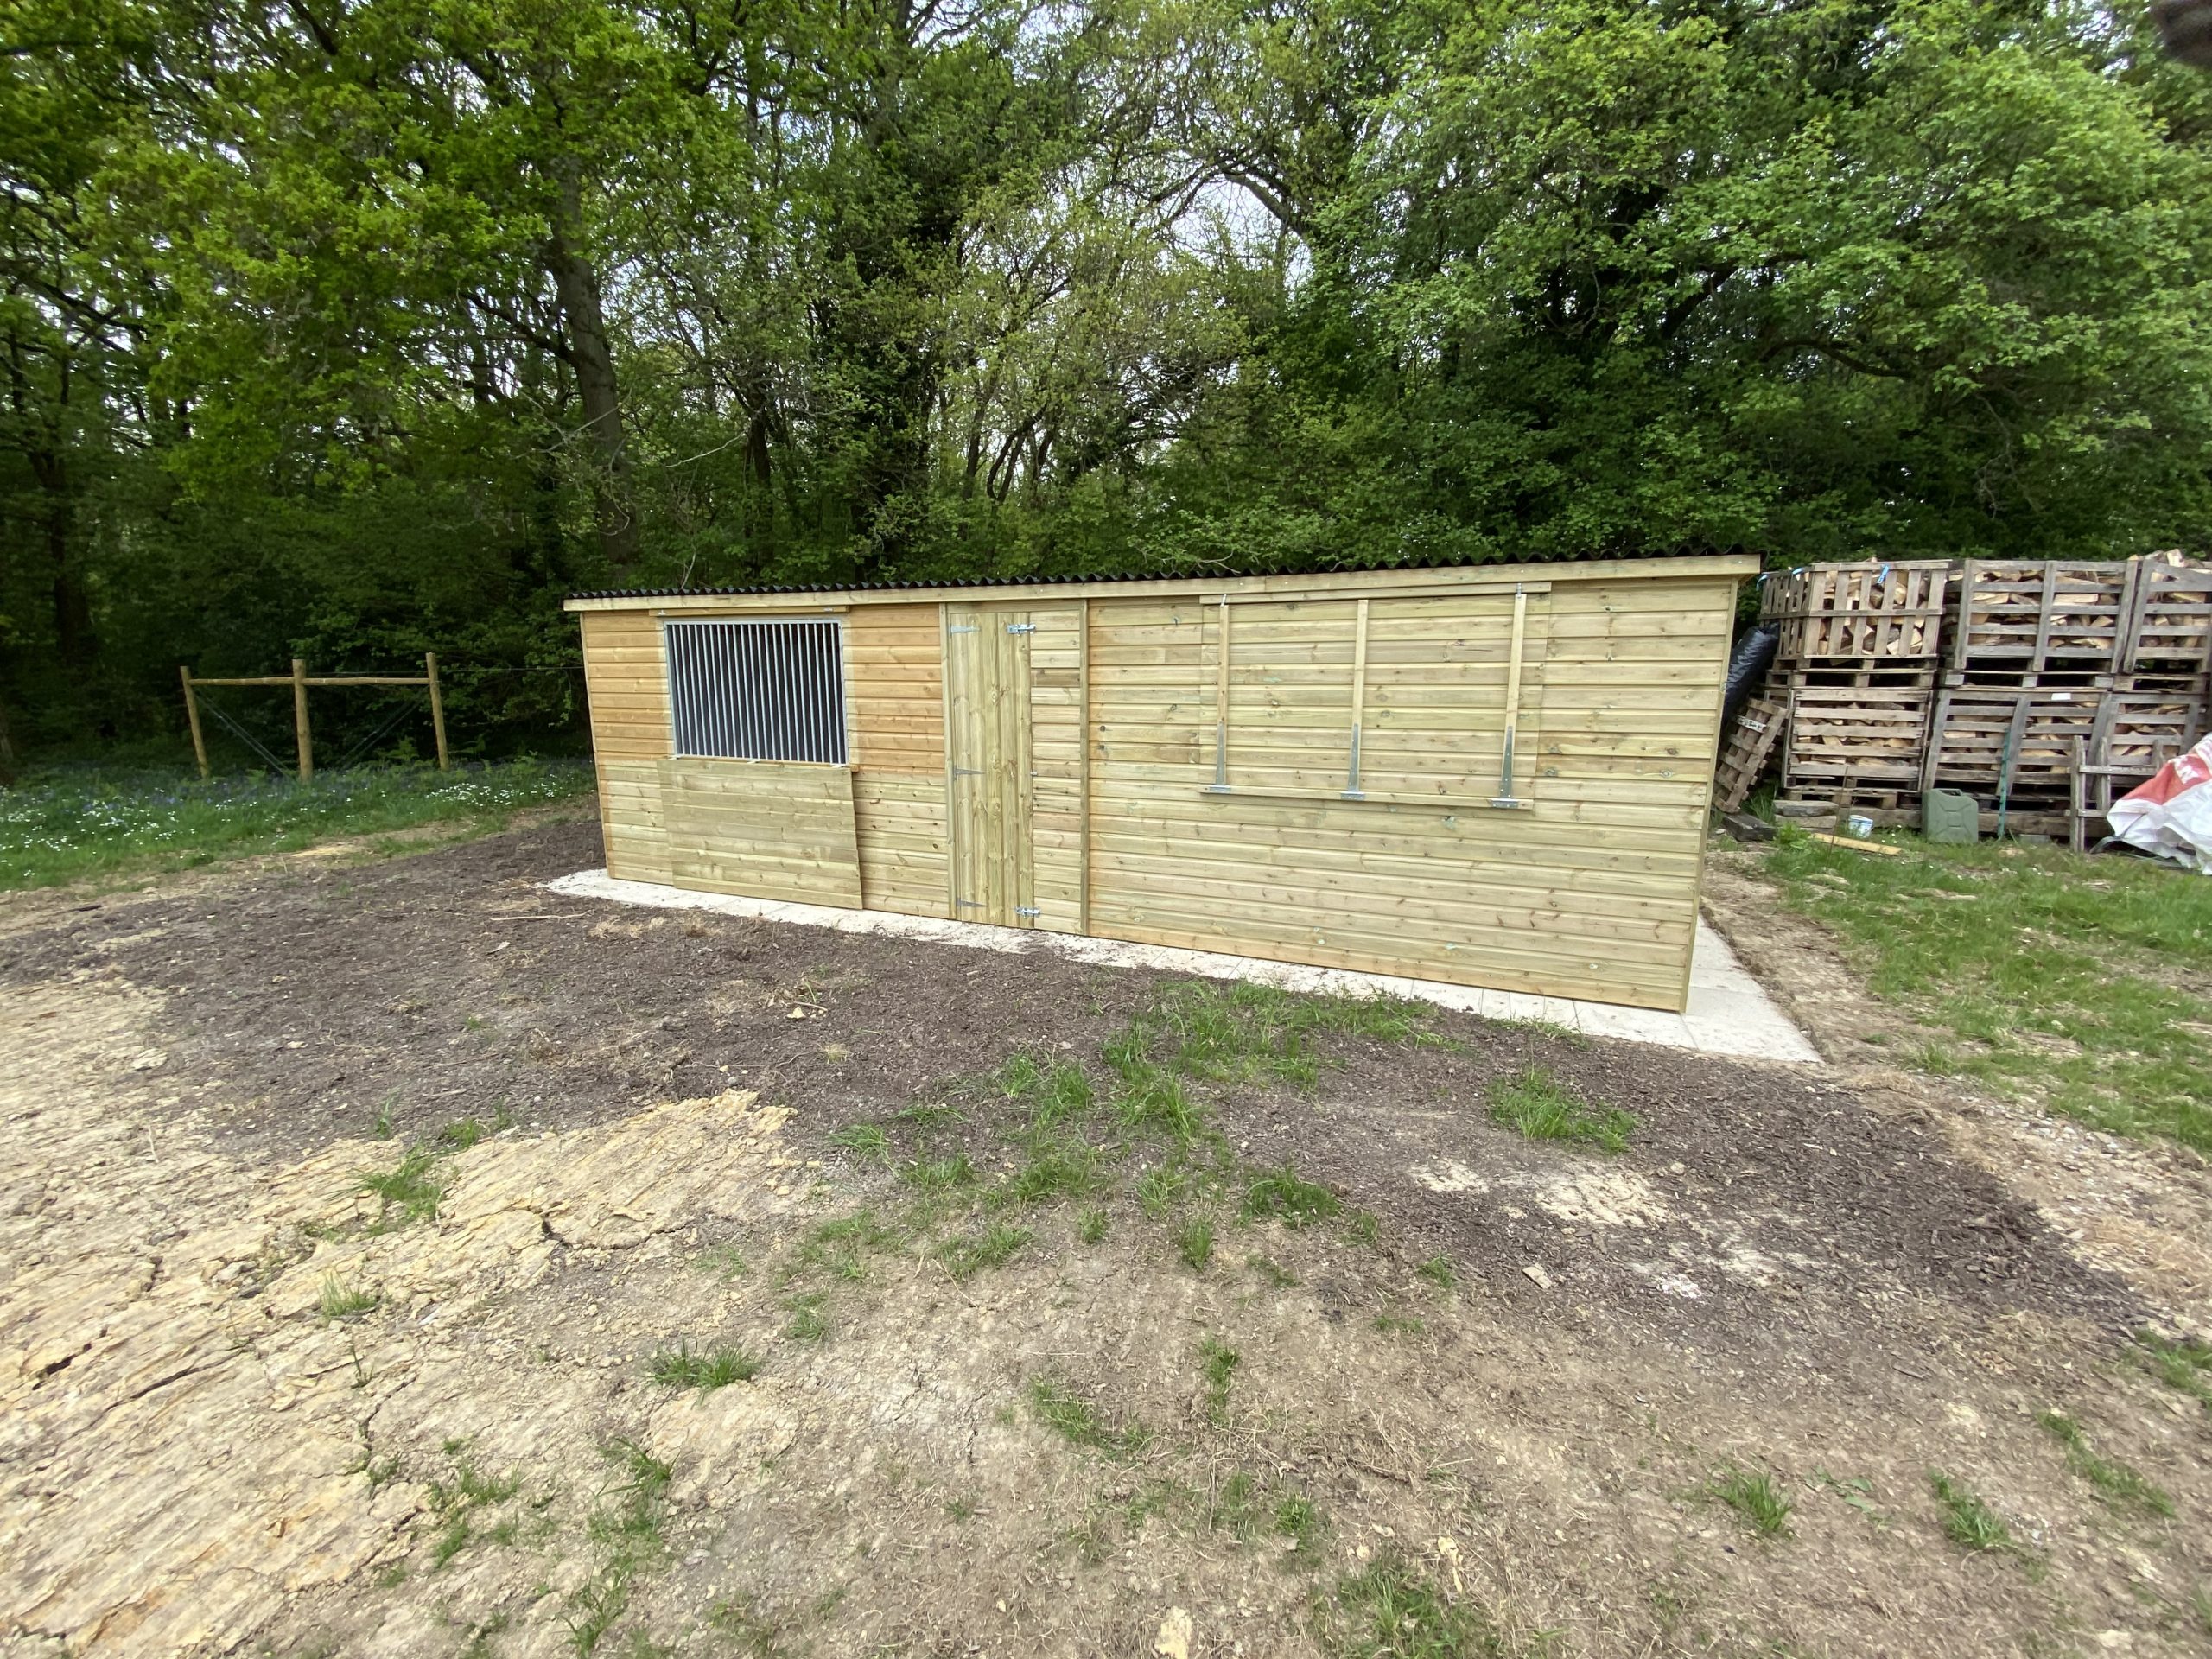 Insulated Falconry mews for birds of prey